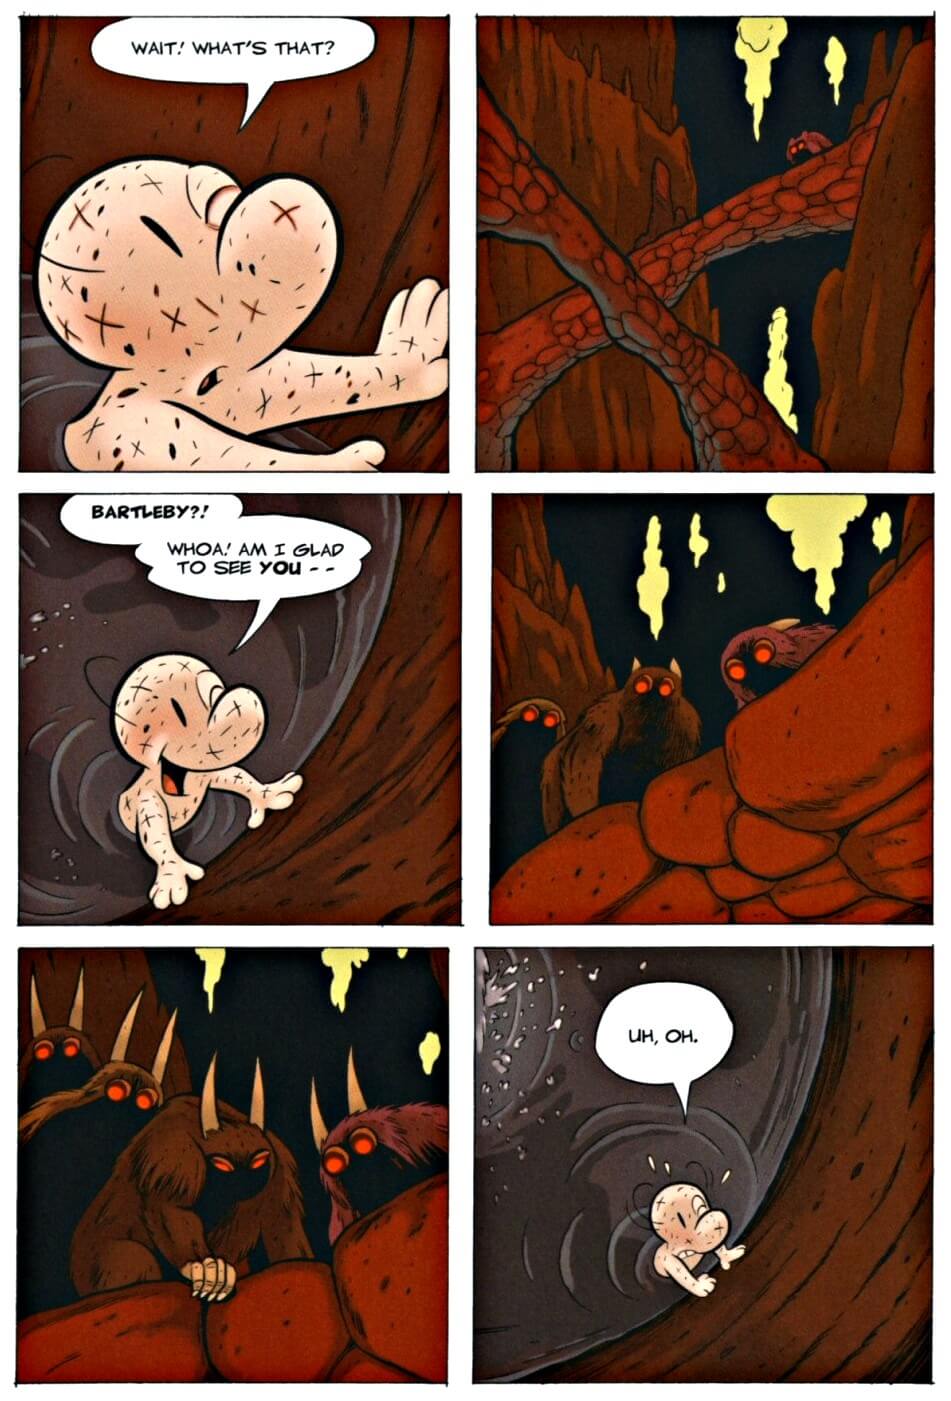 page 128 chapter 5 of bone 9 crown of horns graphic novel